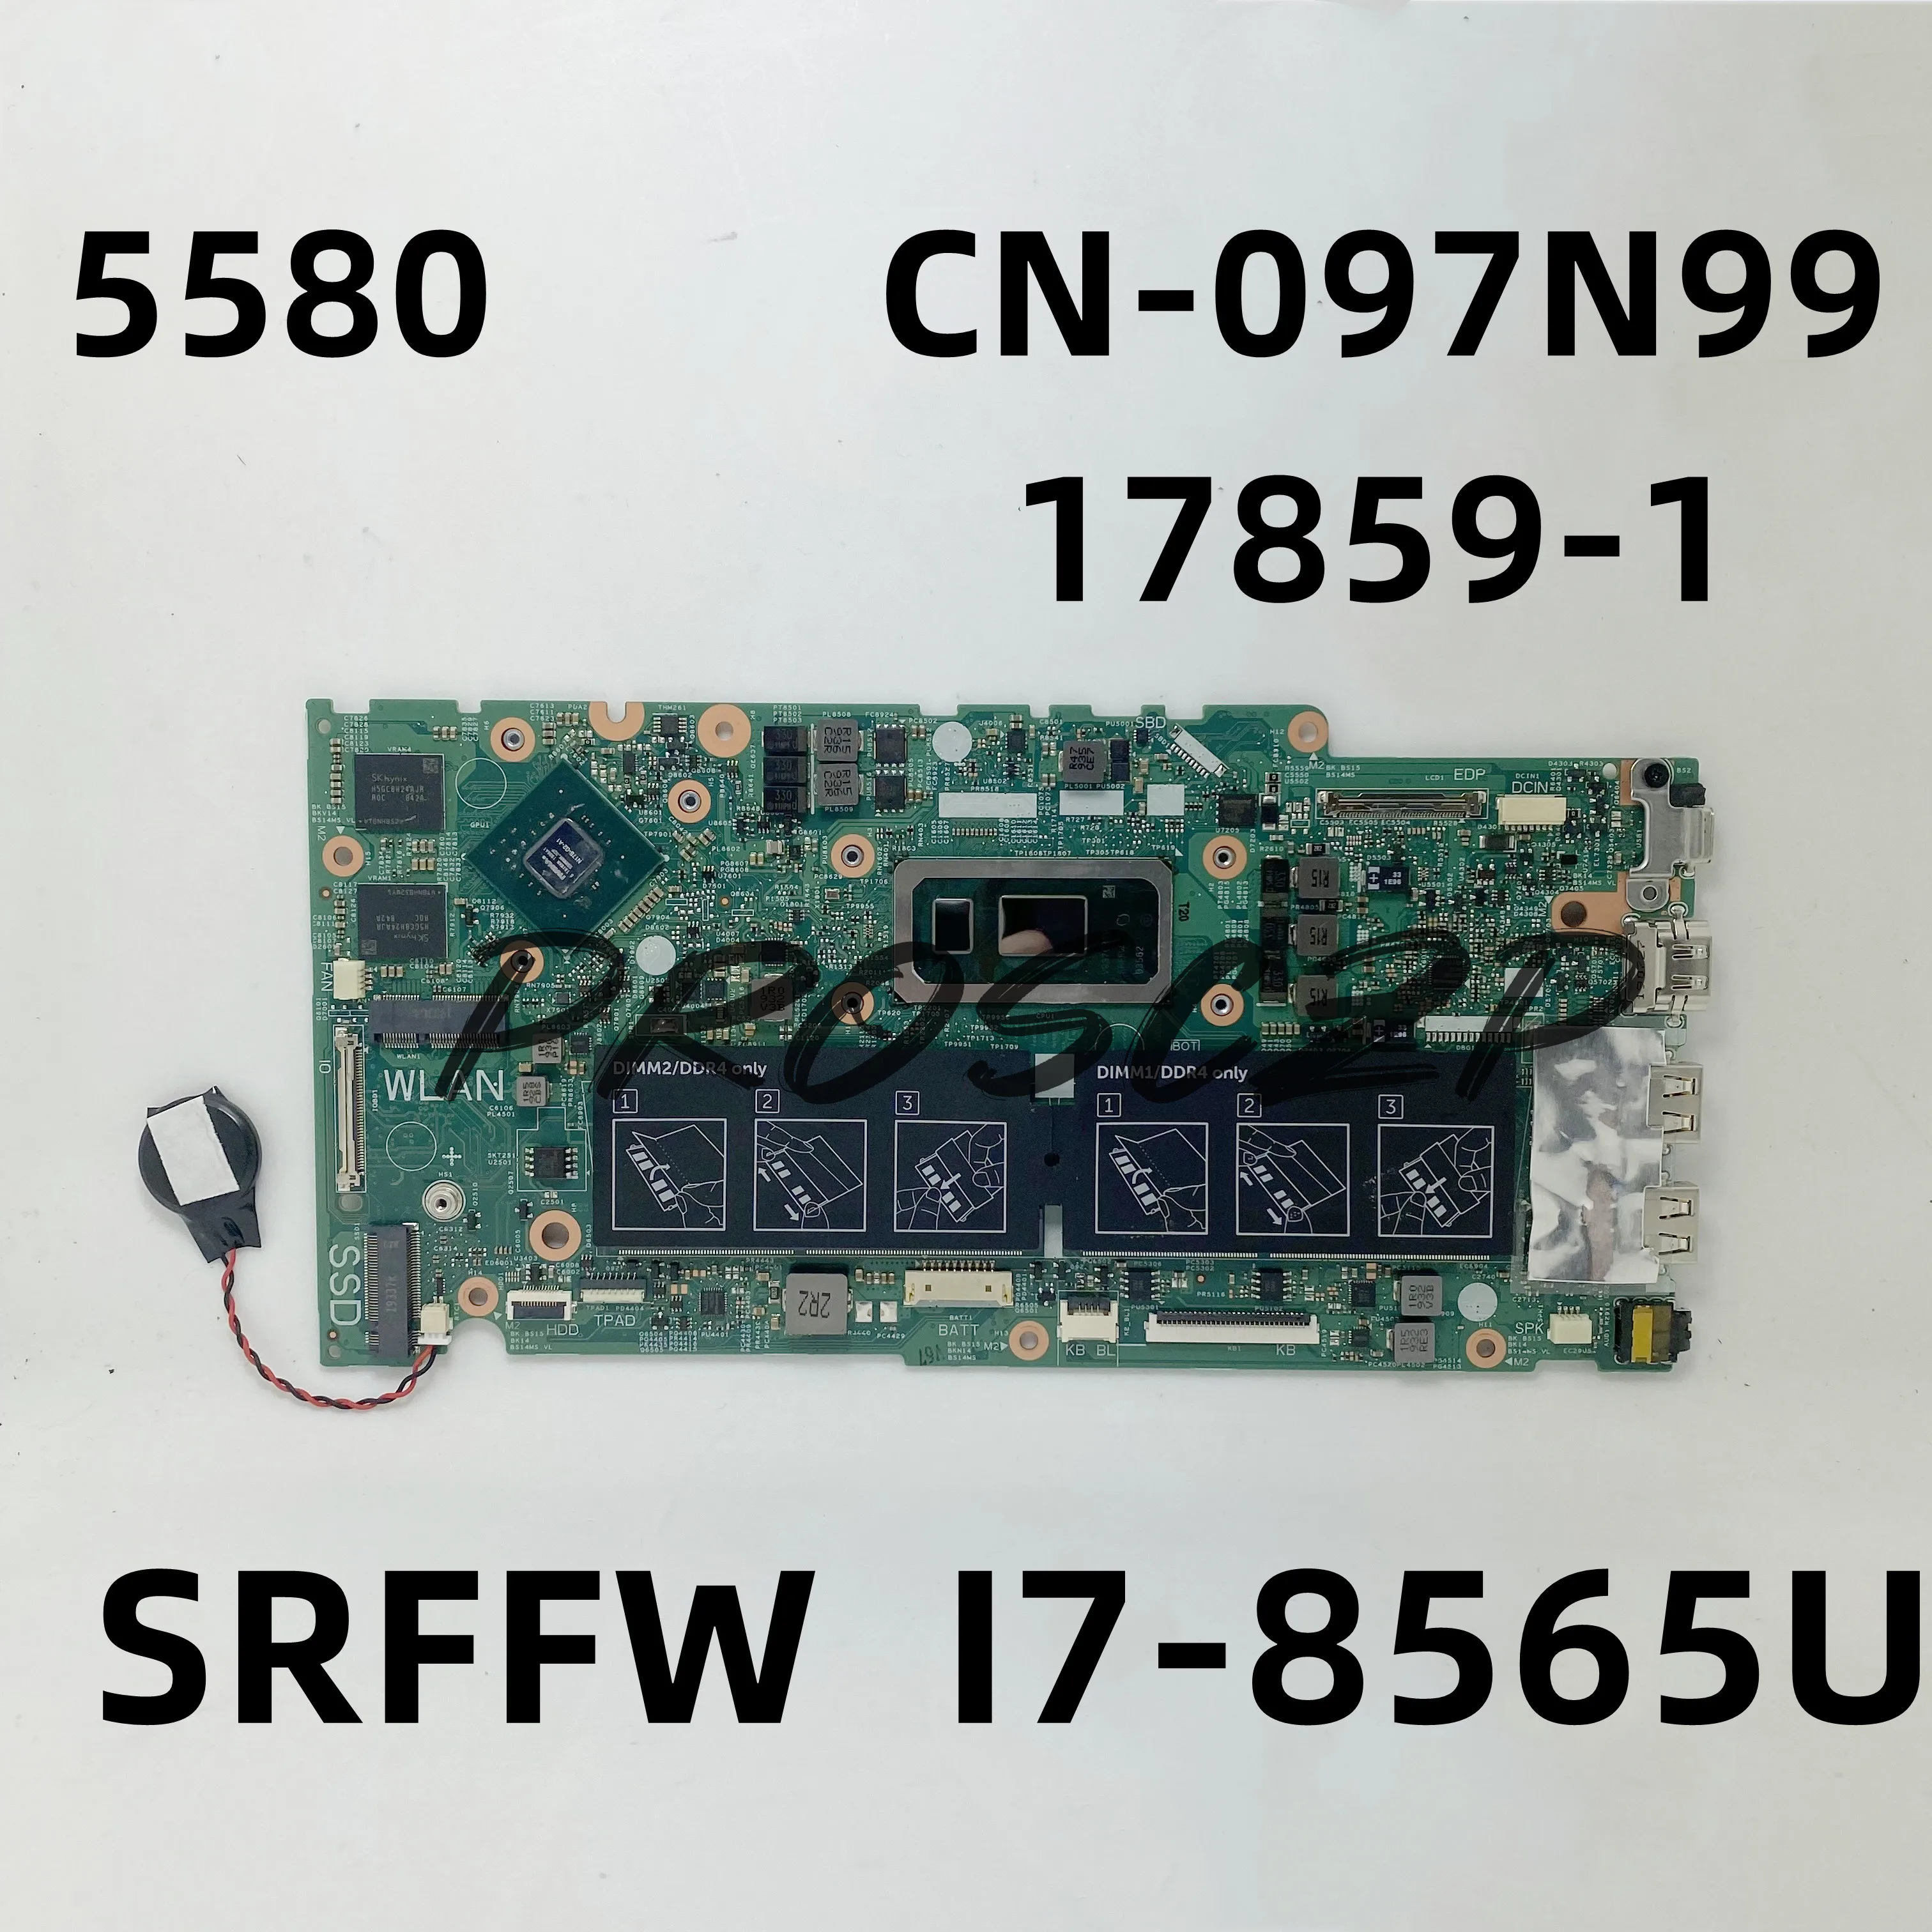 

CN-097N99 097N99 97N99 Mainboard For DELL 5480 5488 5580 Laptop Motherboard 17859-1 With SRFFW I7-8565U CPU 100% Fully Tested OK